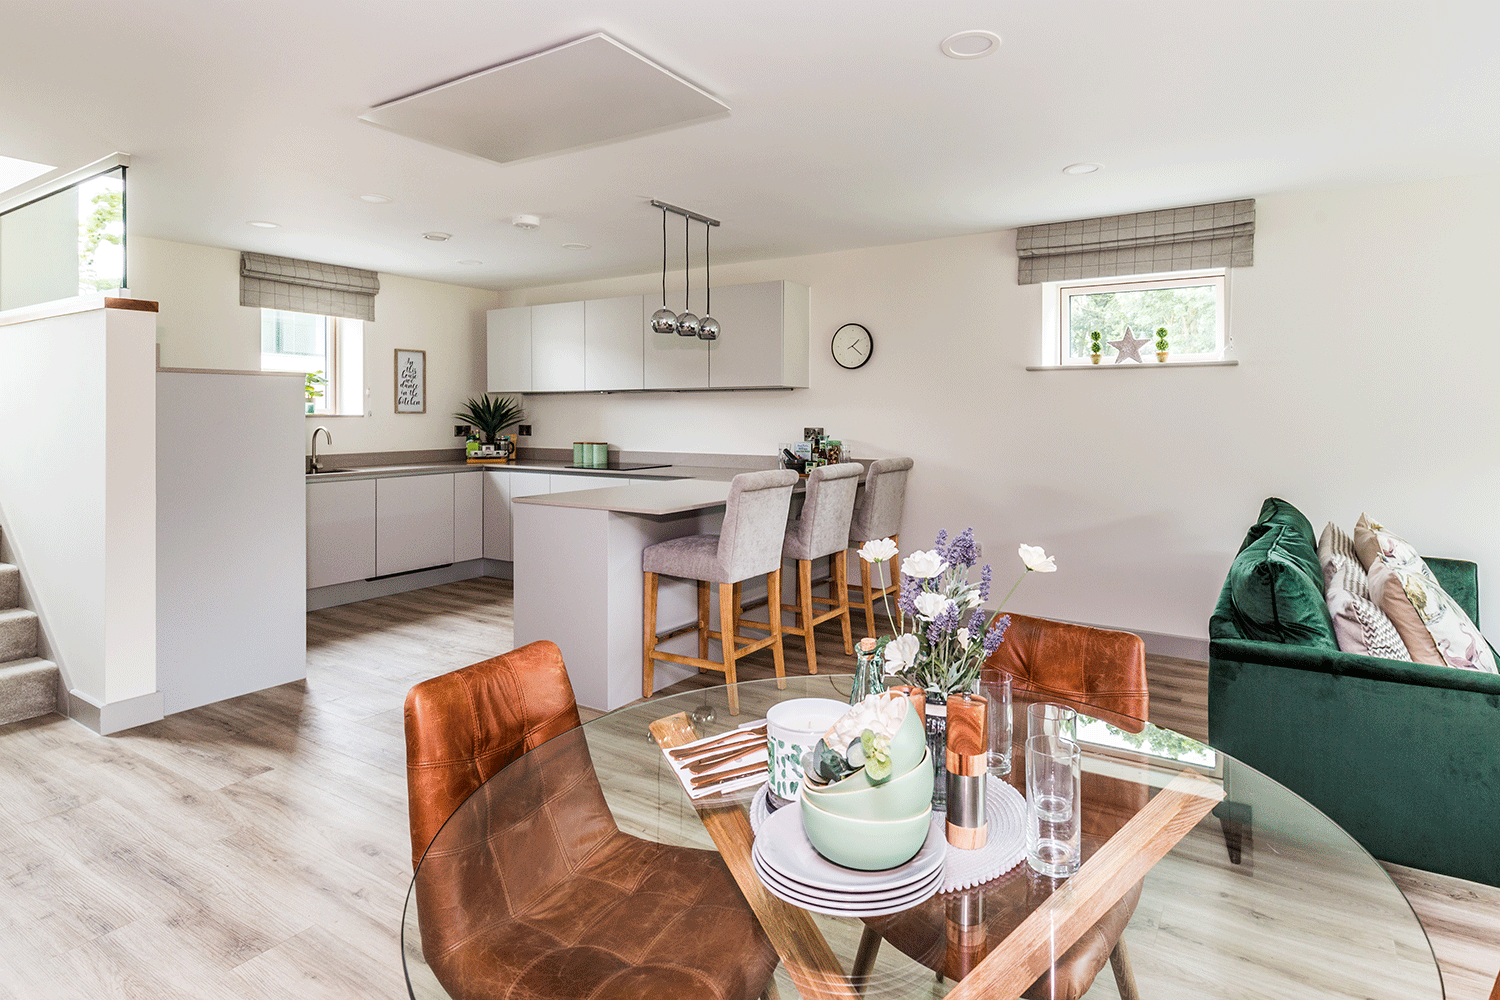 https://gustohomes.co.uk/wp-content/uploads/2019/09/Interior-2A.gif